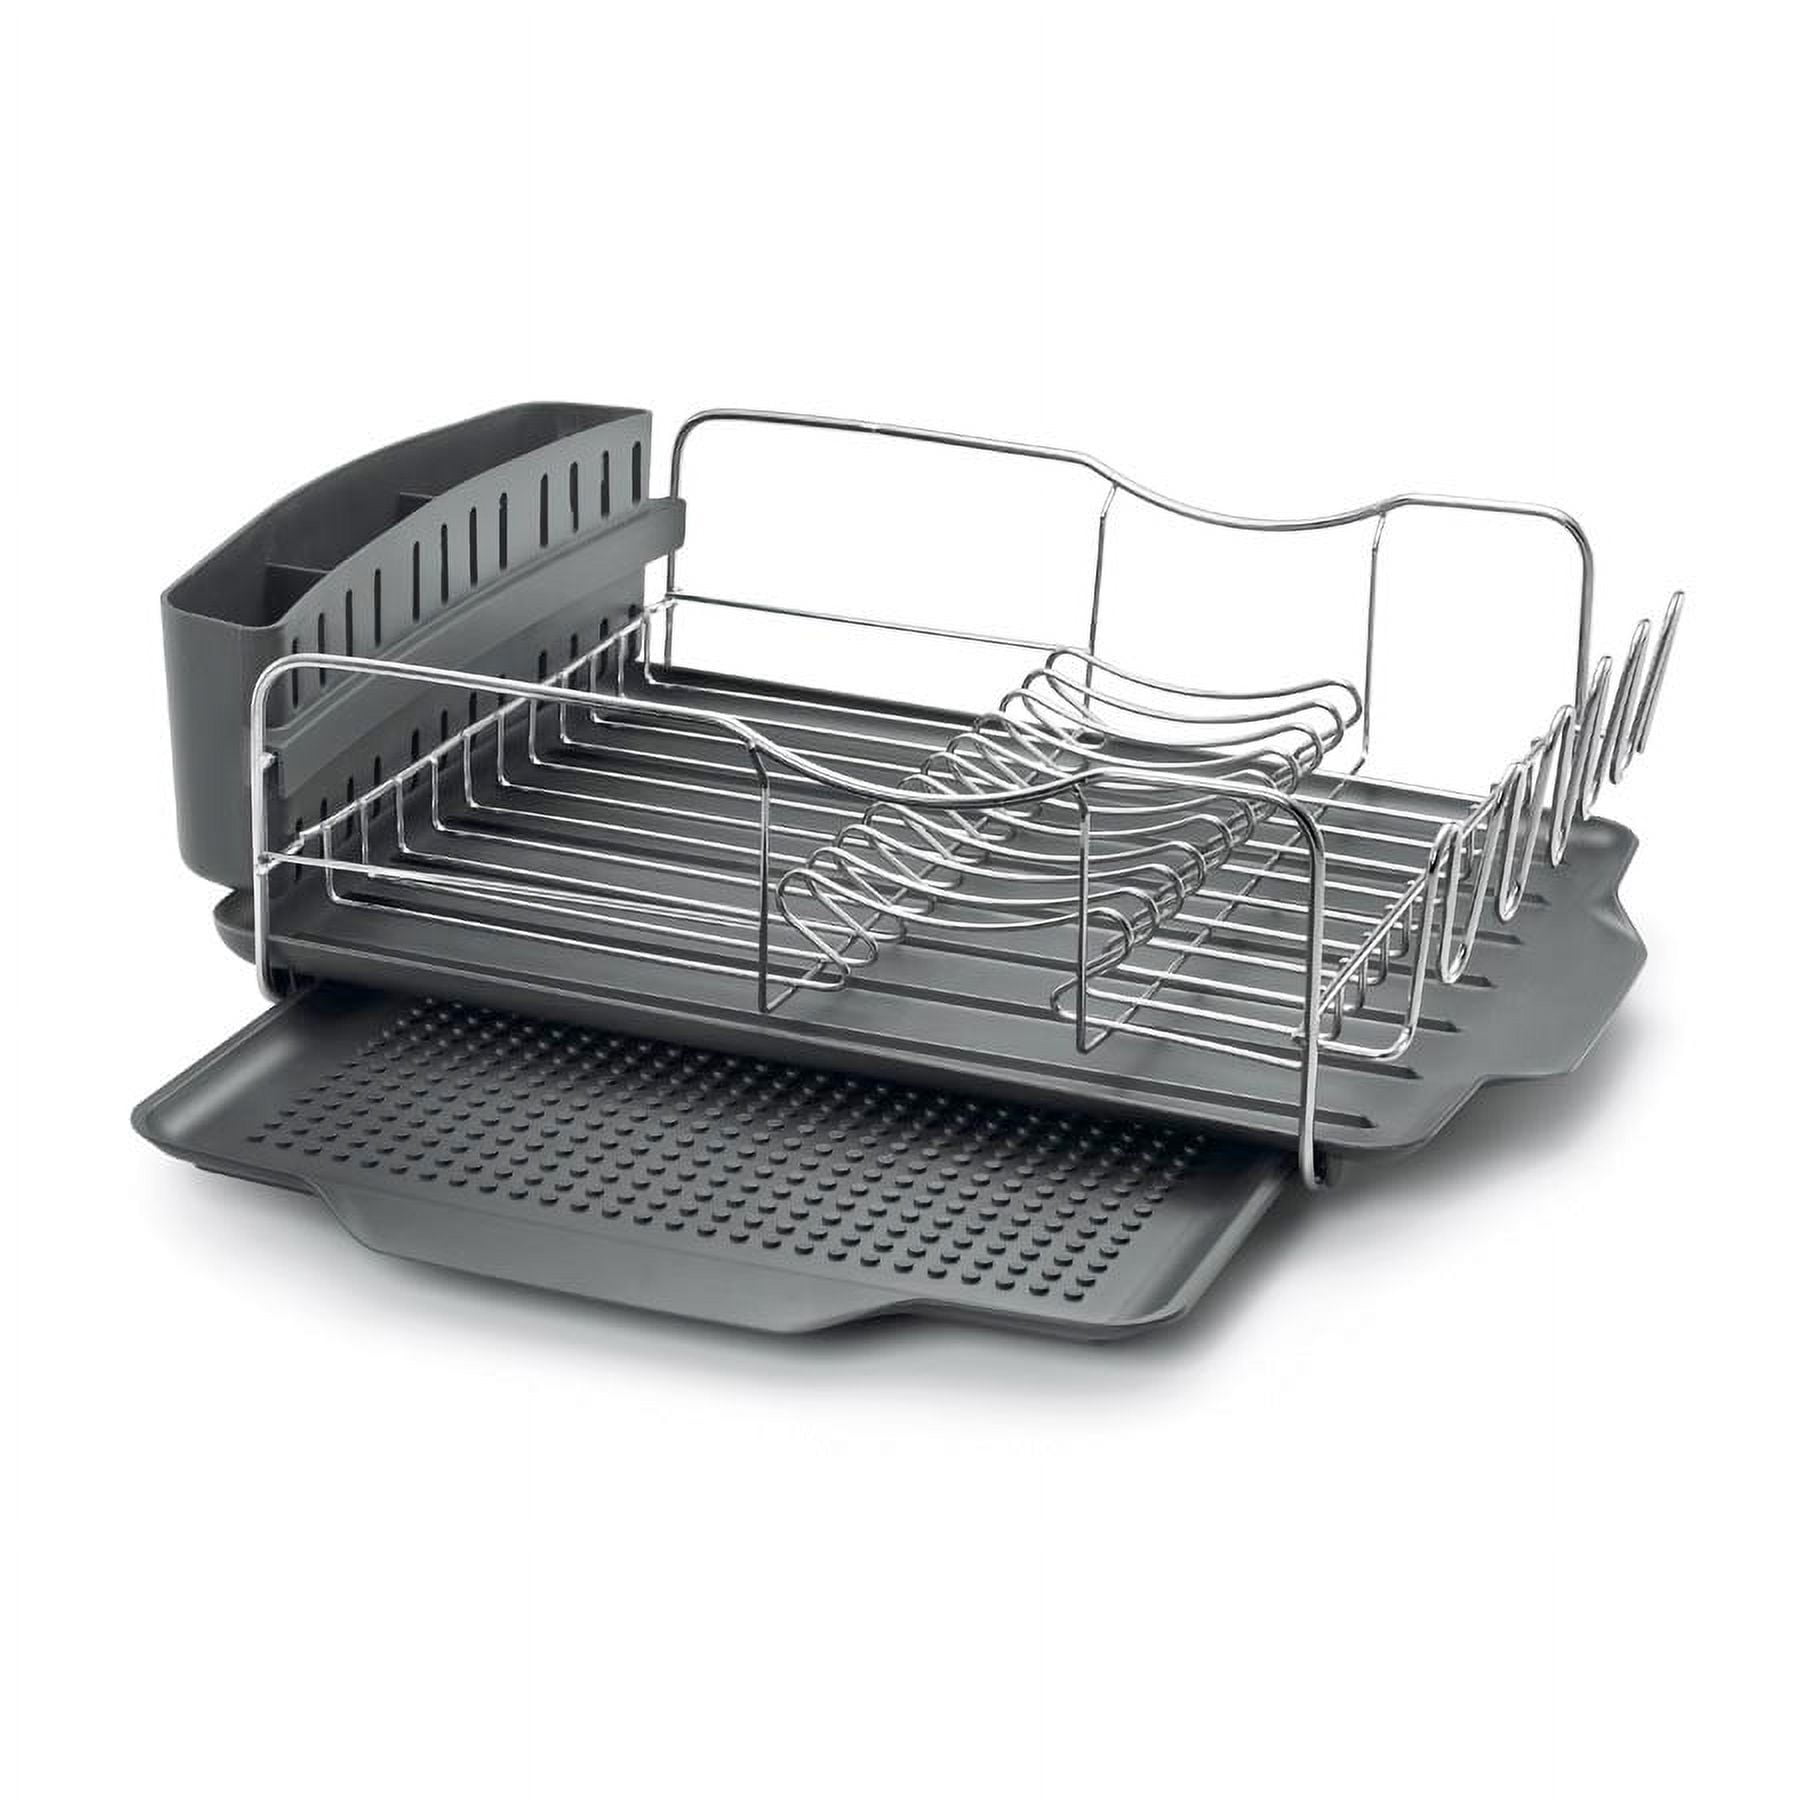 Spring Dish Rack – Polder Products